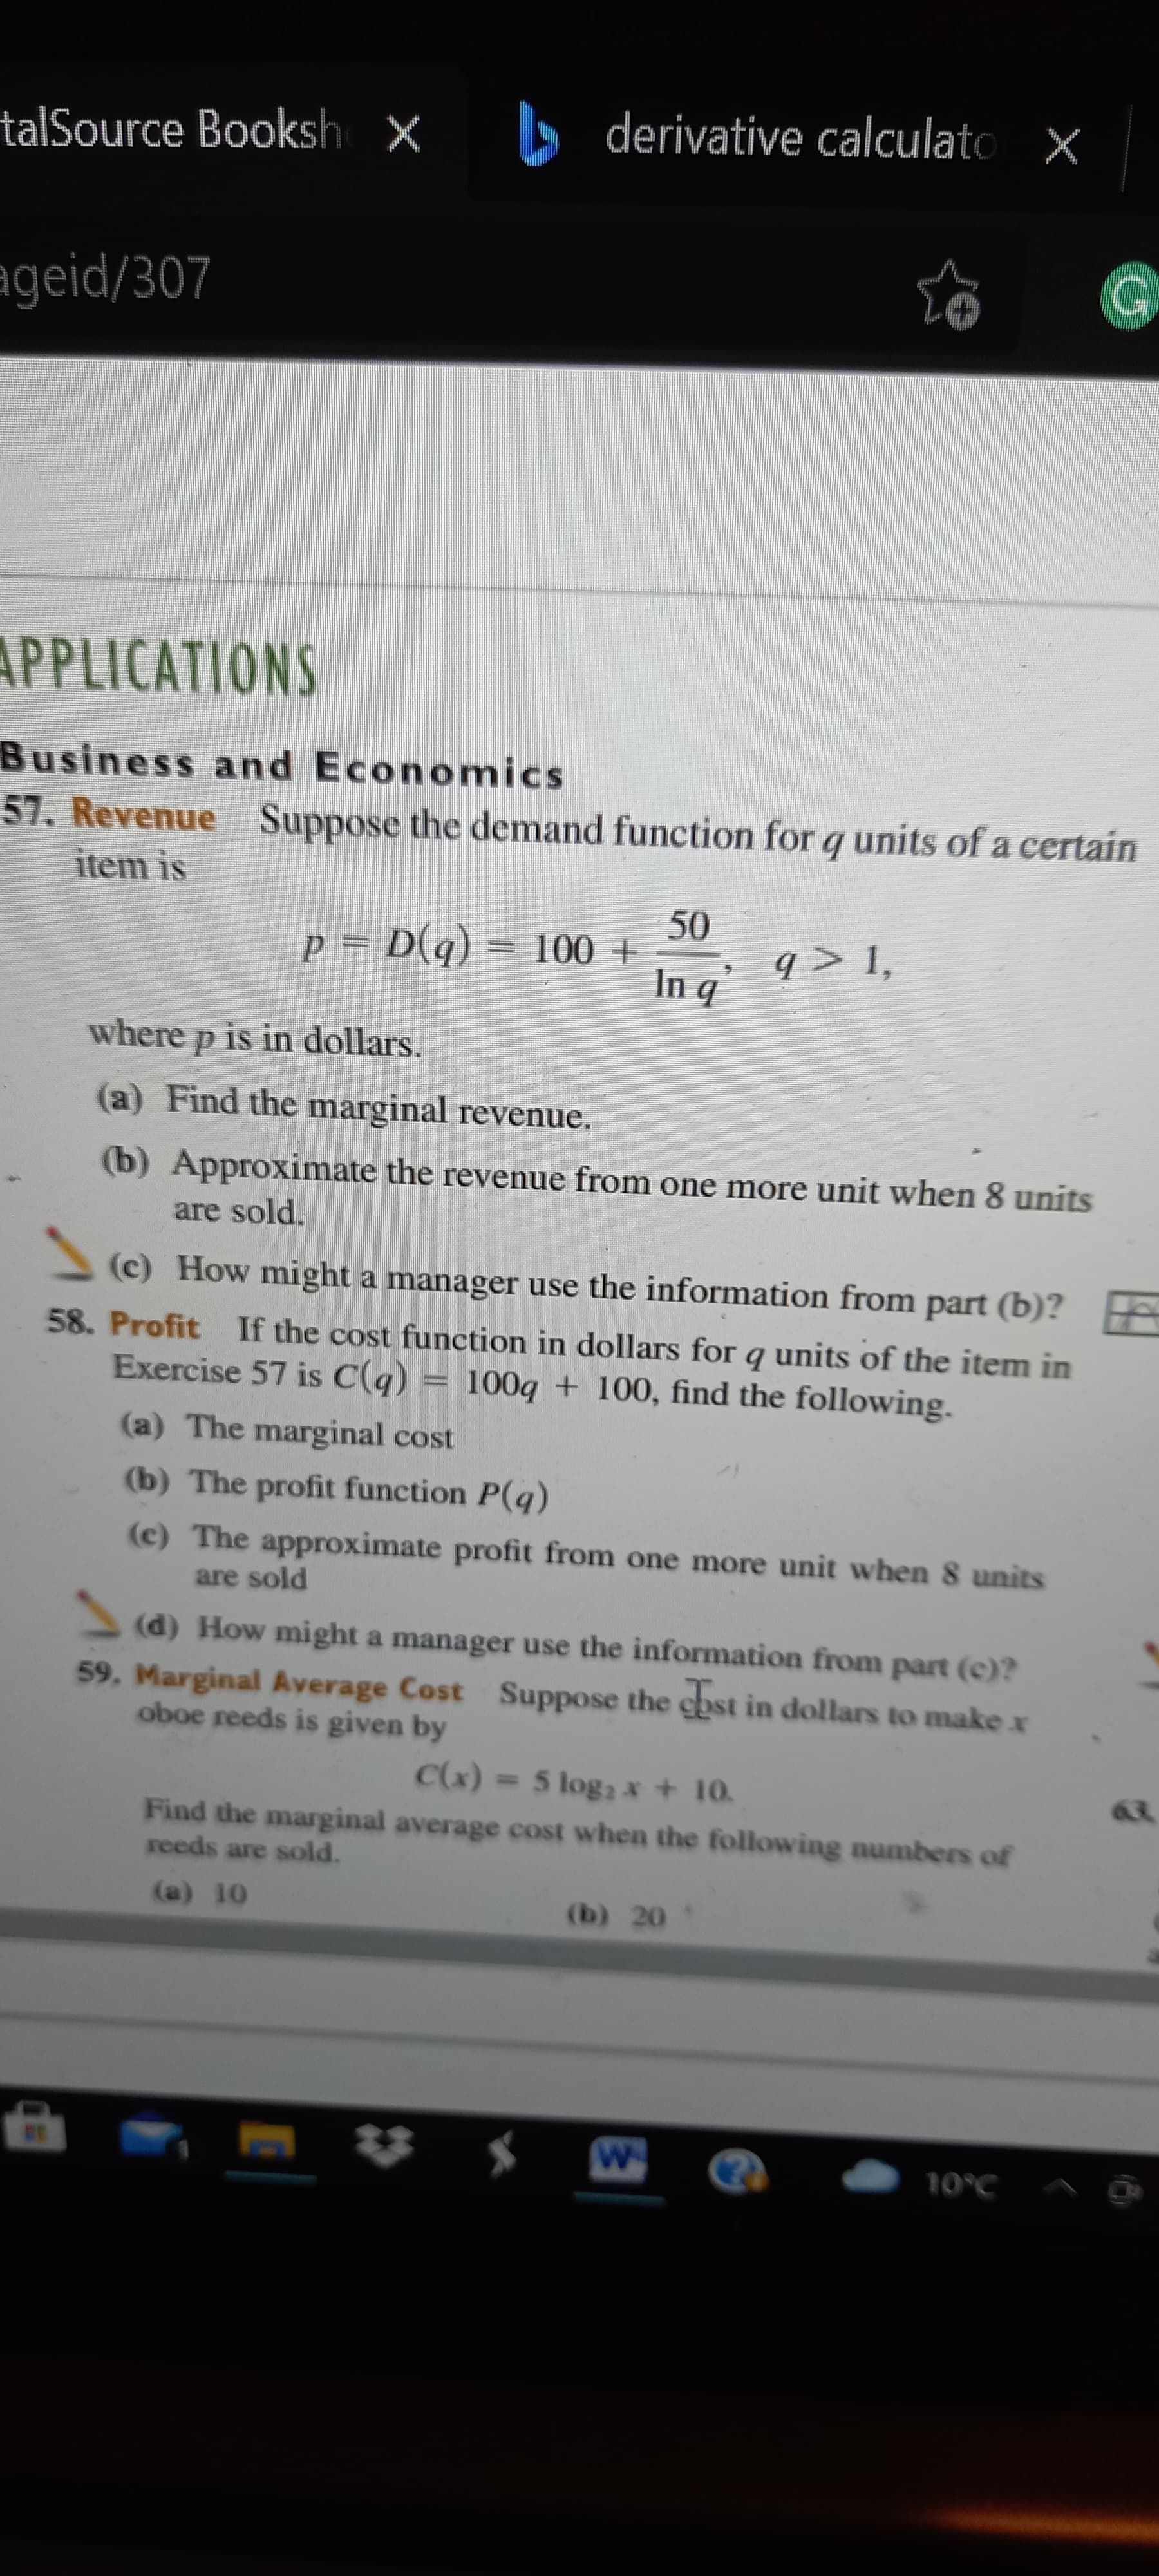 talSource Booksh x derivative calculato x
ageid/307
APPLICATIONS
Business and Economics
57. Revenue
Suppose the demand function for q units of a certain
item is
= (b)a =Dd
b u
q > 1,
where p is in dollars.
(a) Find the marginal revenue.
(b) Approximate the revenue from one more unit when 8 units
are sold.
(c) How might a manager use the information from part (b)?
58. Profit If the cost function in dollars for q units of the item in
Exercise 57 is C(g)
100g + 100, find the following.
unmn
(a) The marginal cost
(b) The profit function P(q)
(c) The approximate profit from one more unit when 8 units
are sold
(d) How might a manager use the information from part (c)?
59. Marginal Average Cost Suppose the chst in dollars to make x
oboe reeds is given by
(*)
Find the marginal average cost when the following numbers of
= 5 log2 x + 10.
reeds are sold.
(b) 20
